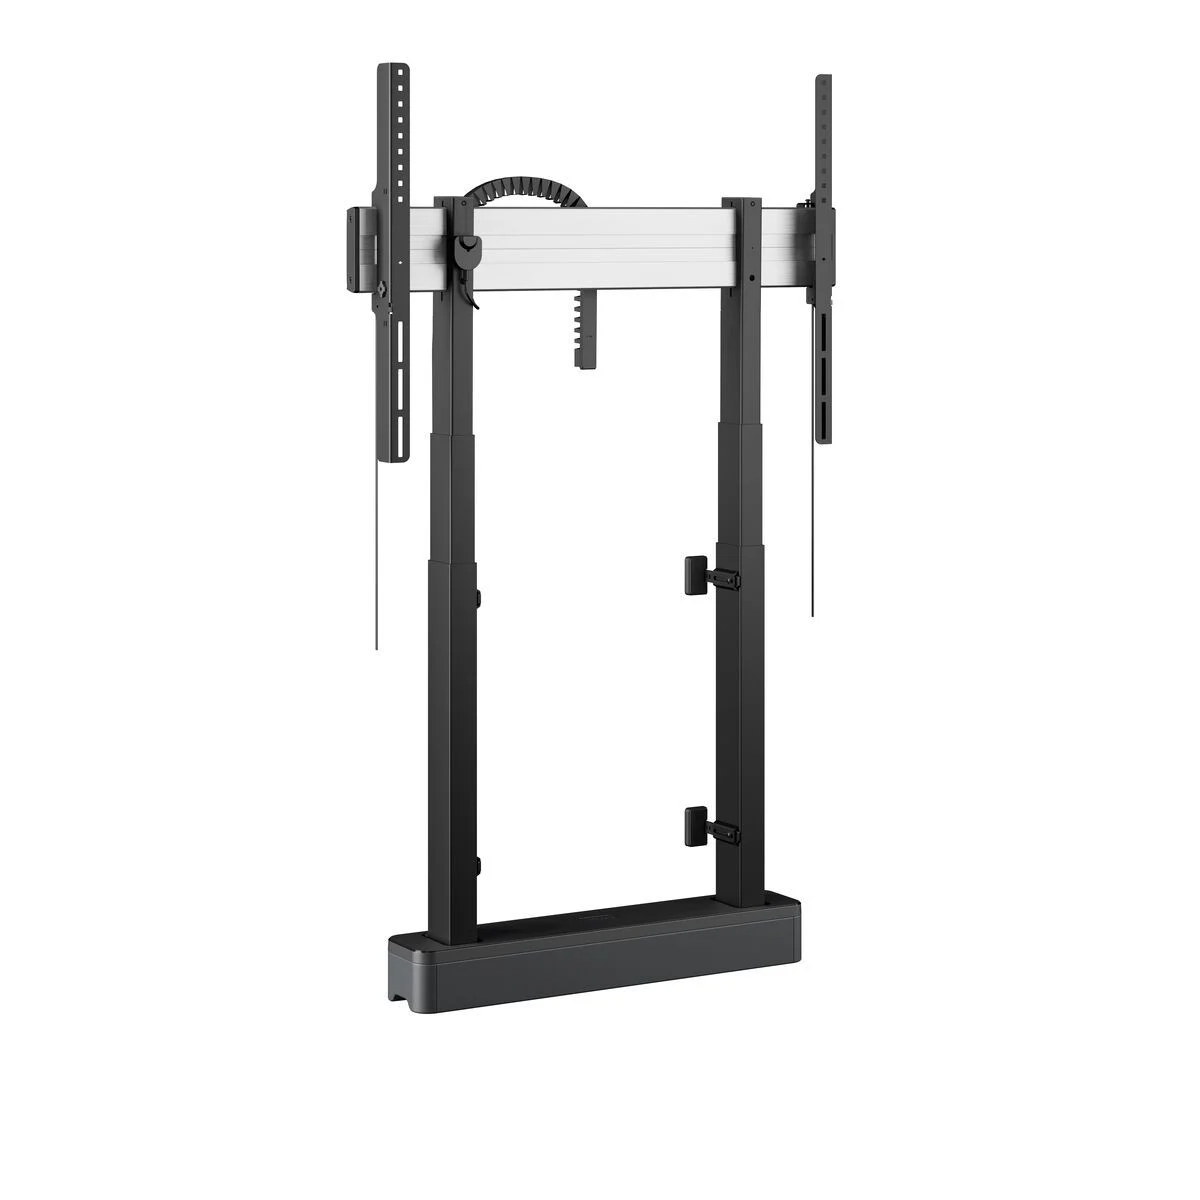 VOGELS RISE 2008 MOTORIZED DISPLAY LIFT FLOOR-WALL UP TO 140KG 80MM/S - BLACK image